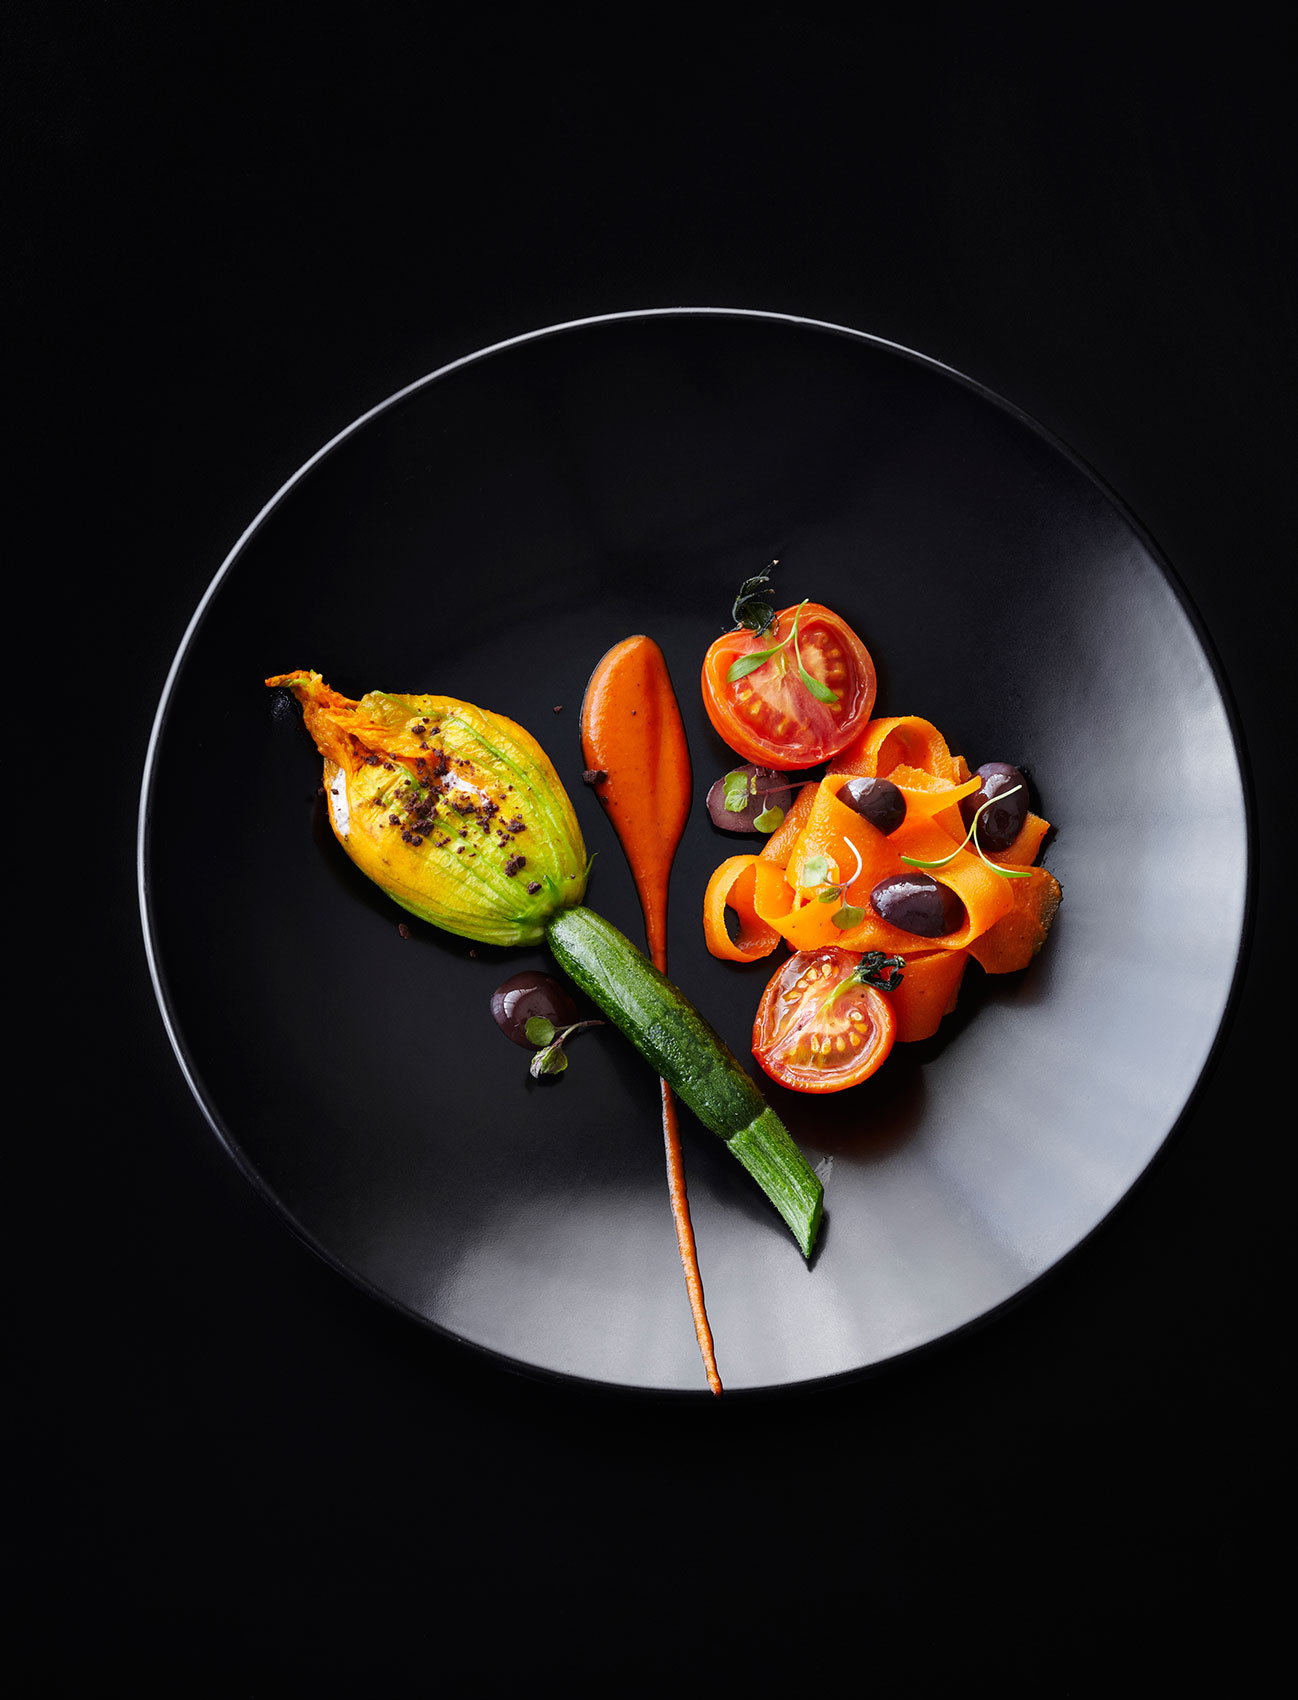 Southon Cooking • The Foodstore New Zealand Fine Dining Roast Carrots with Olives • Hospitality & Editorial Food Photography